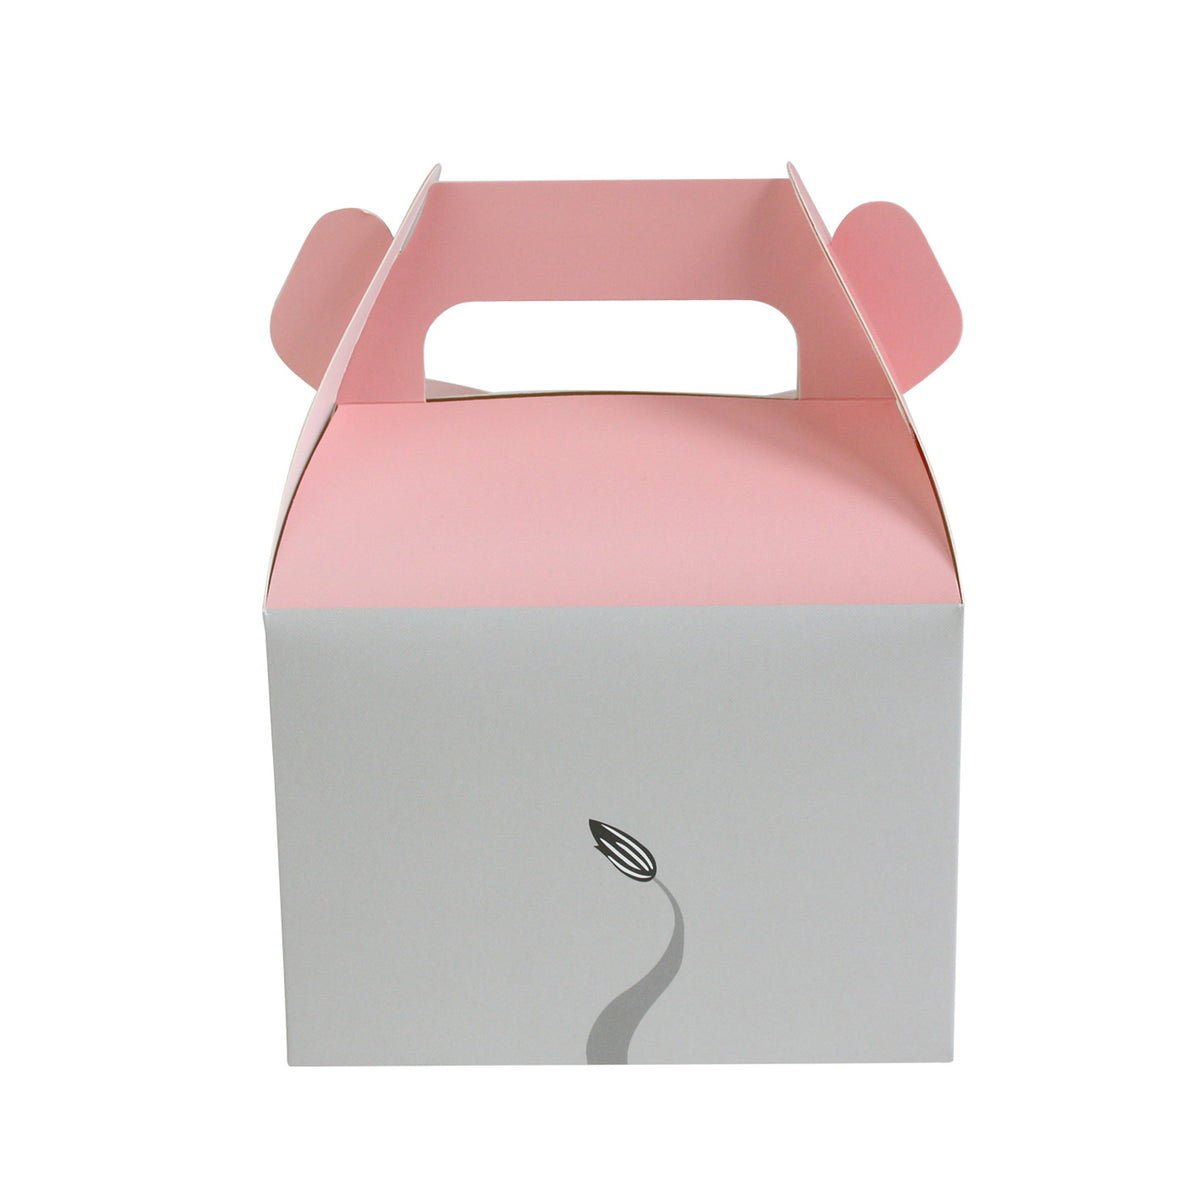 Fun and colorful kids' party favor boxes